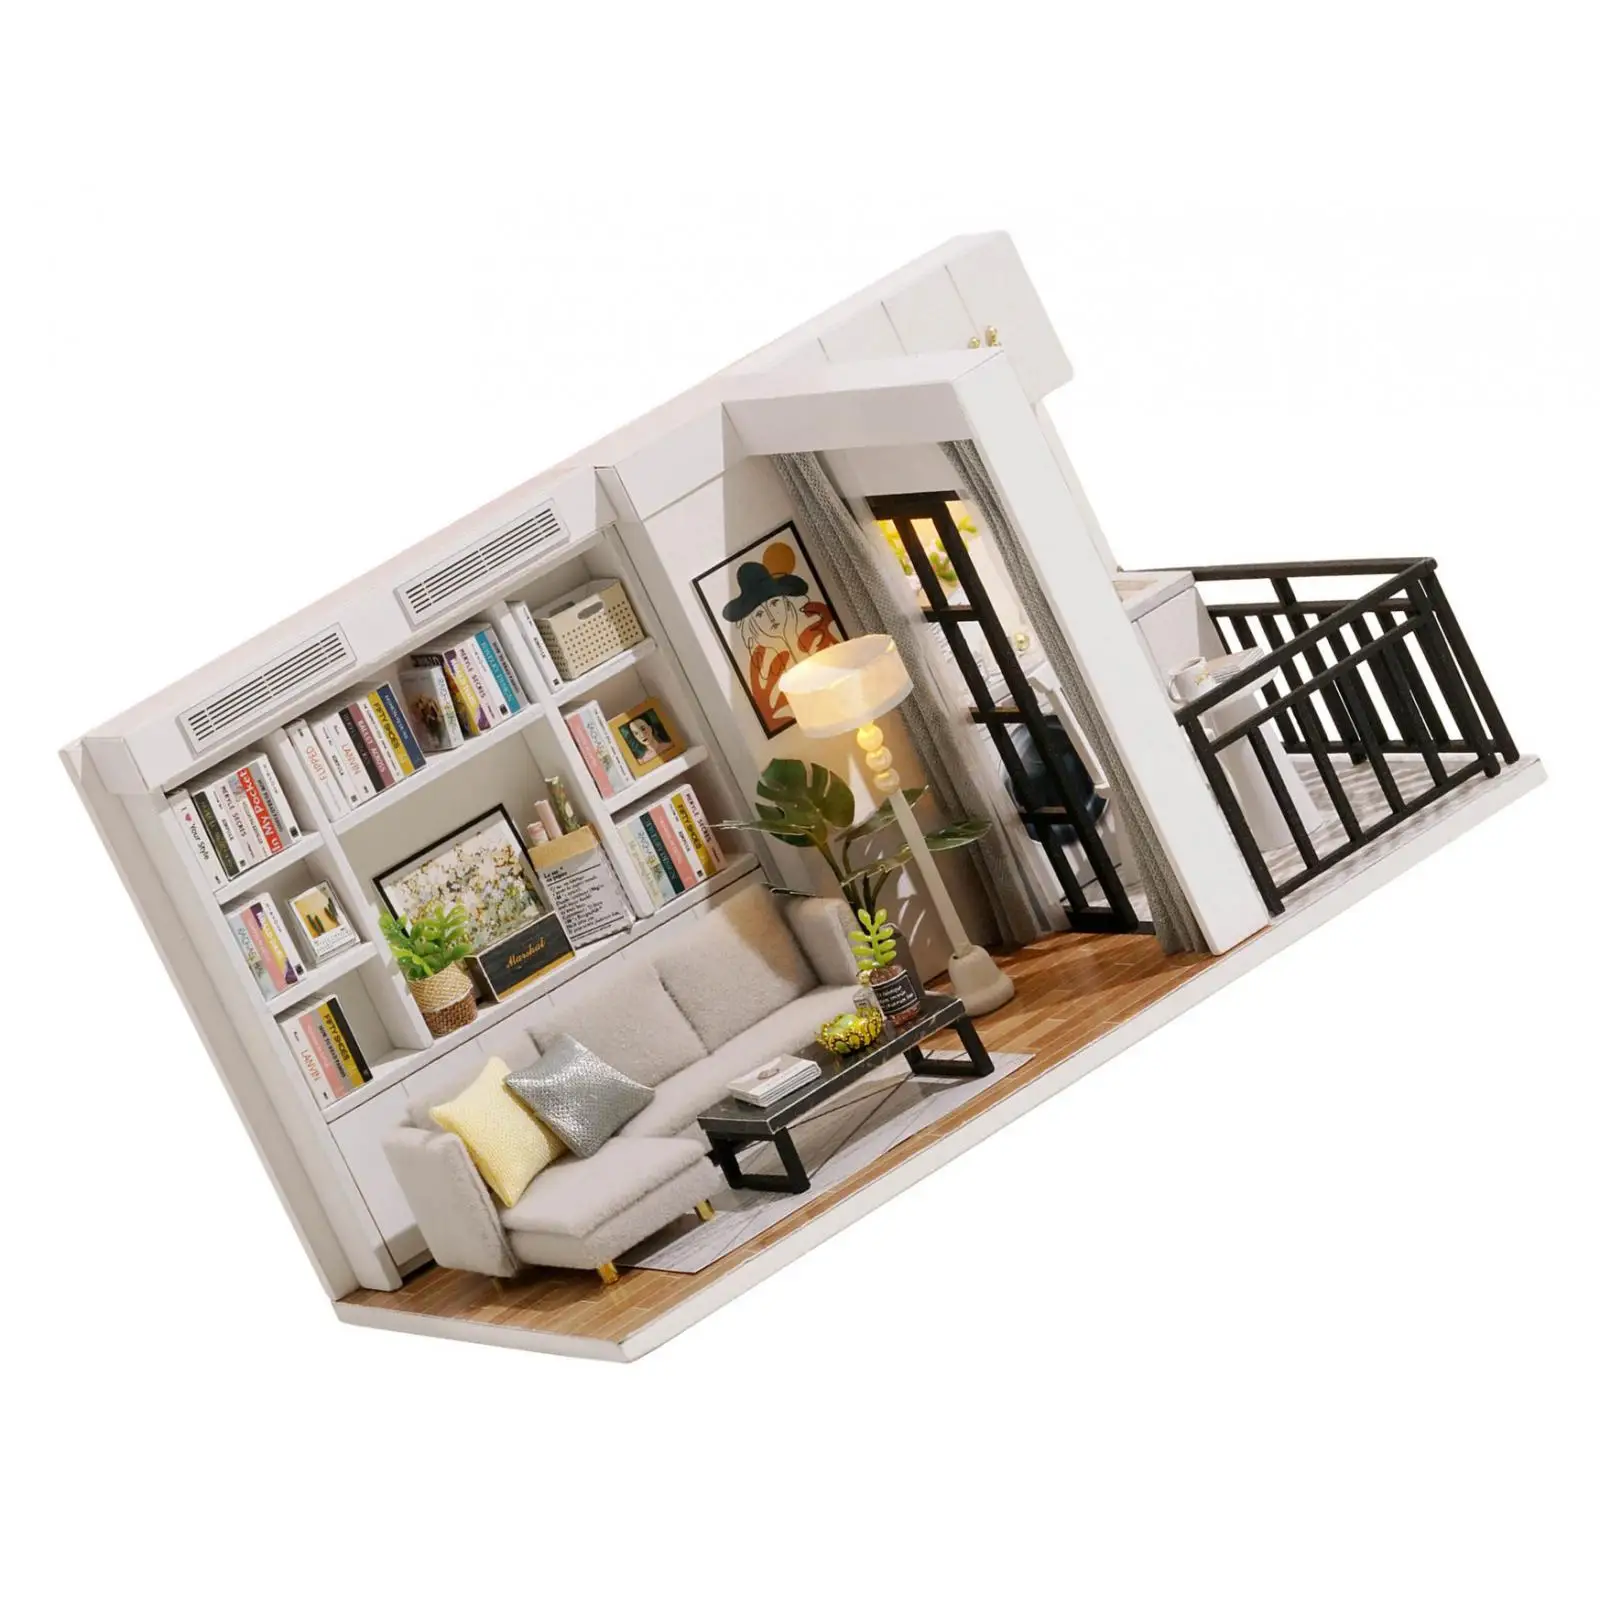 1:32 DIY 3D Wooden Miniature Dolls House with Furniture Building Modern Living Room Puzzles Kit Gift